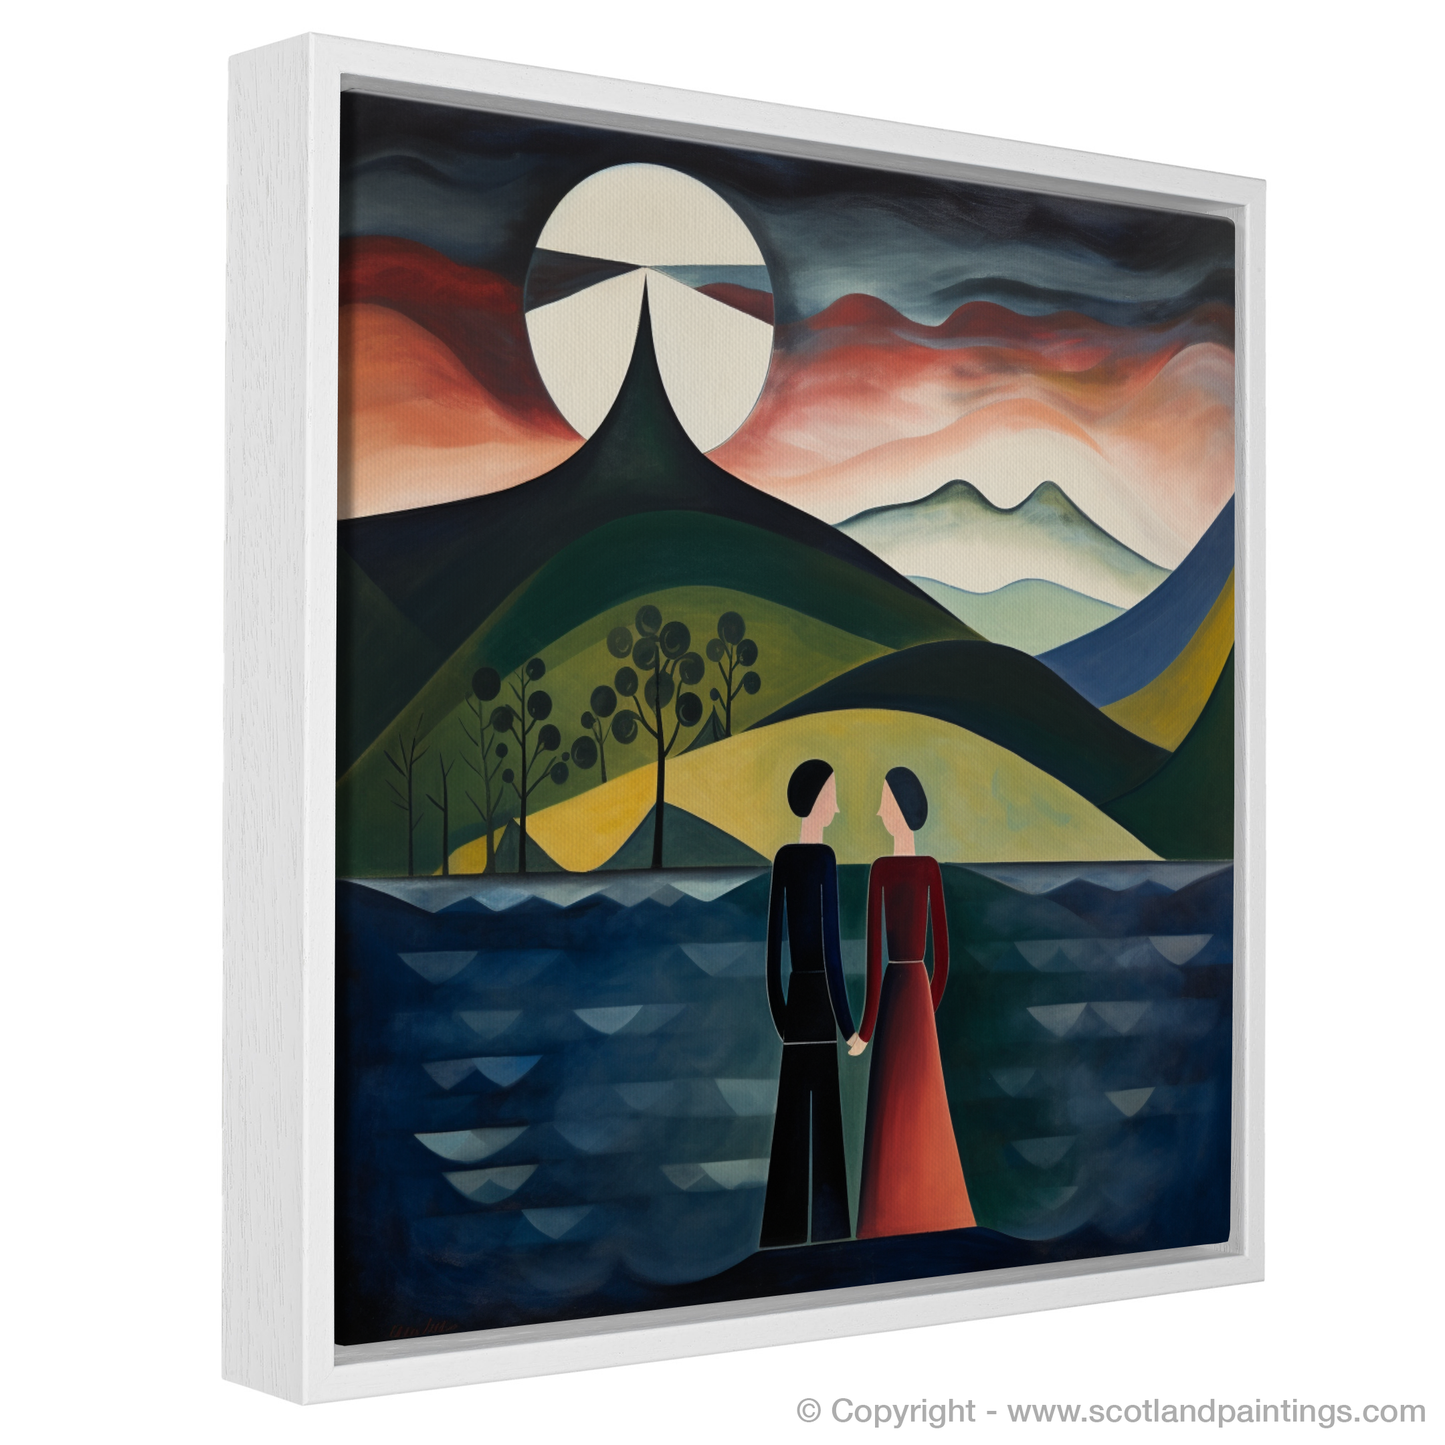 Painting and Art Print of A couple holding hands looking out on Loch Lomond entitled "Embracing Tranquility at Loch Lomond".